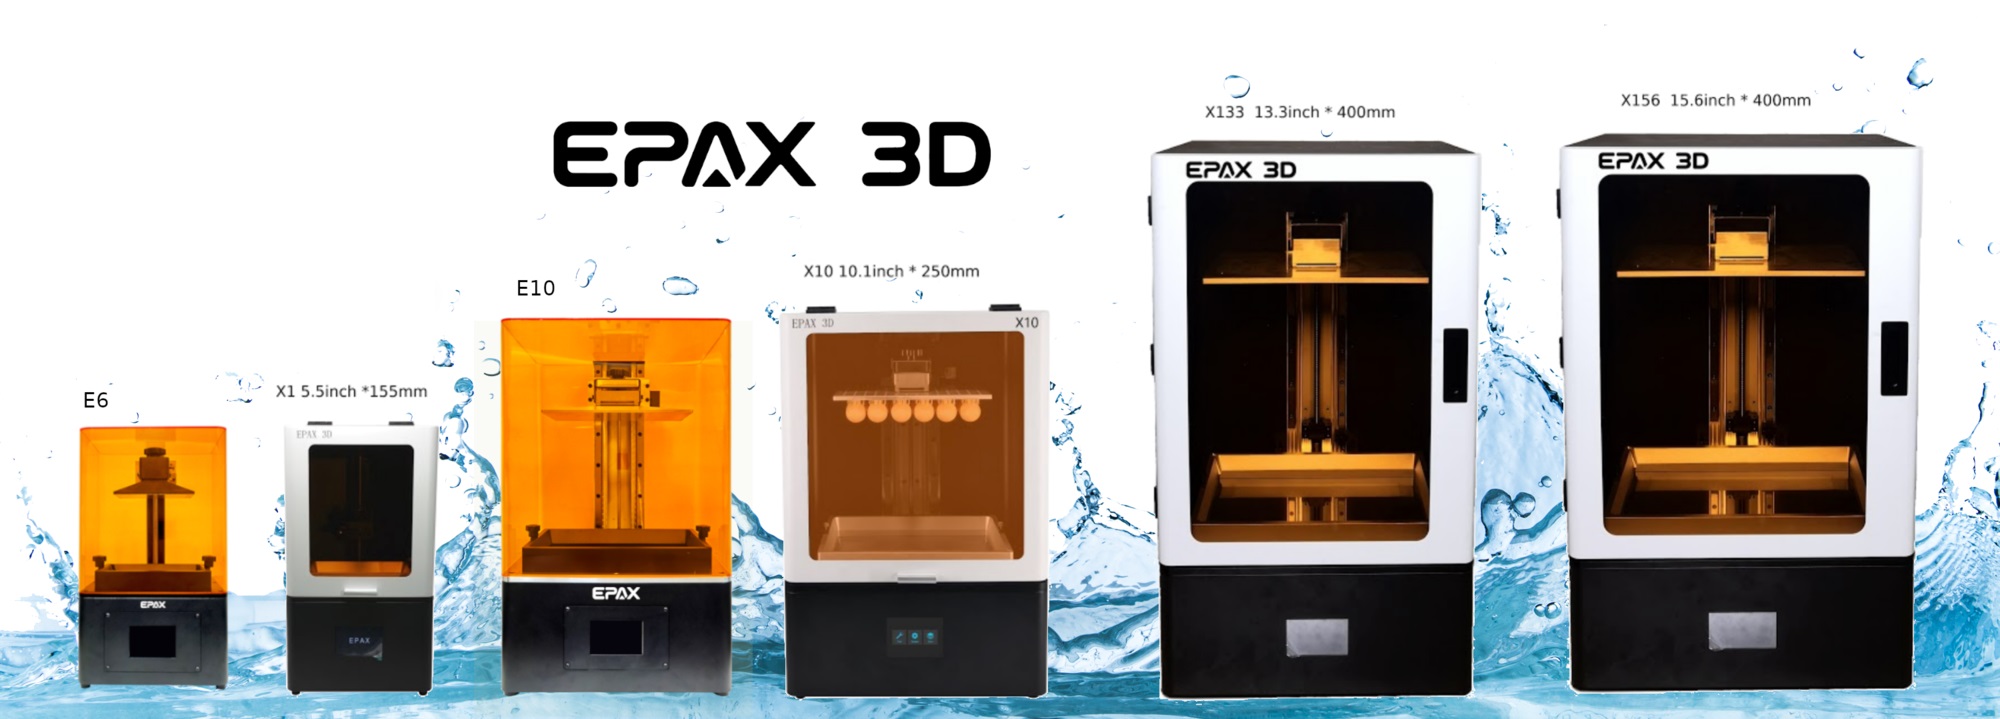 Epax3D Epax resin 3D-printer line-up compatible with liqcreate engineering resins